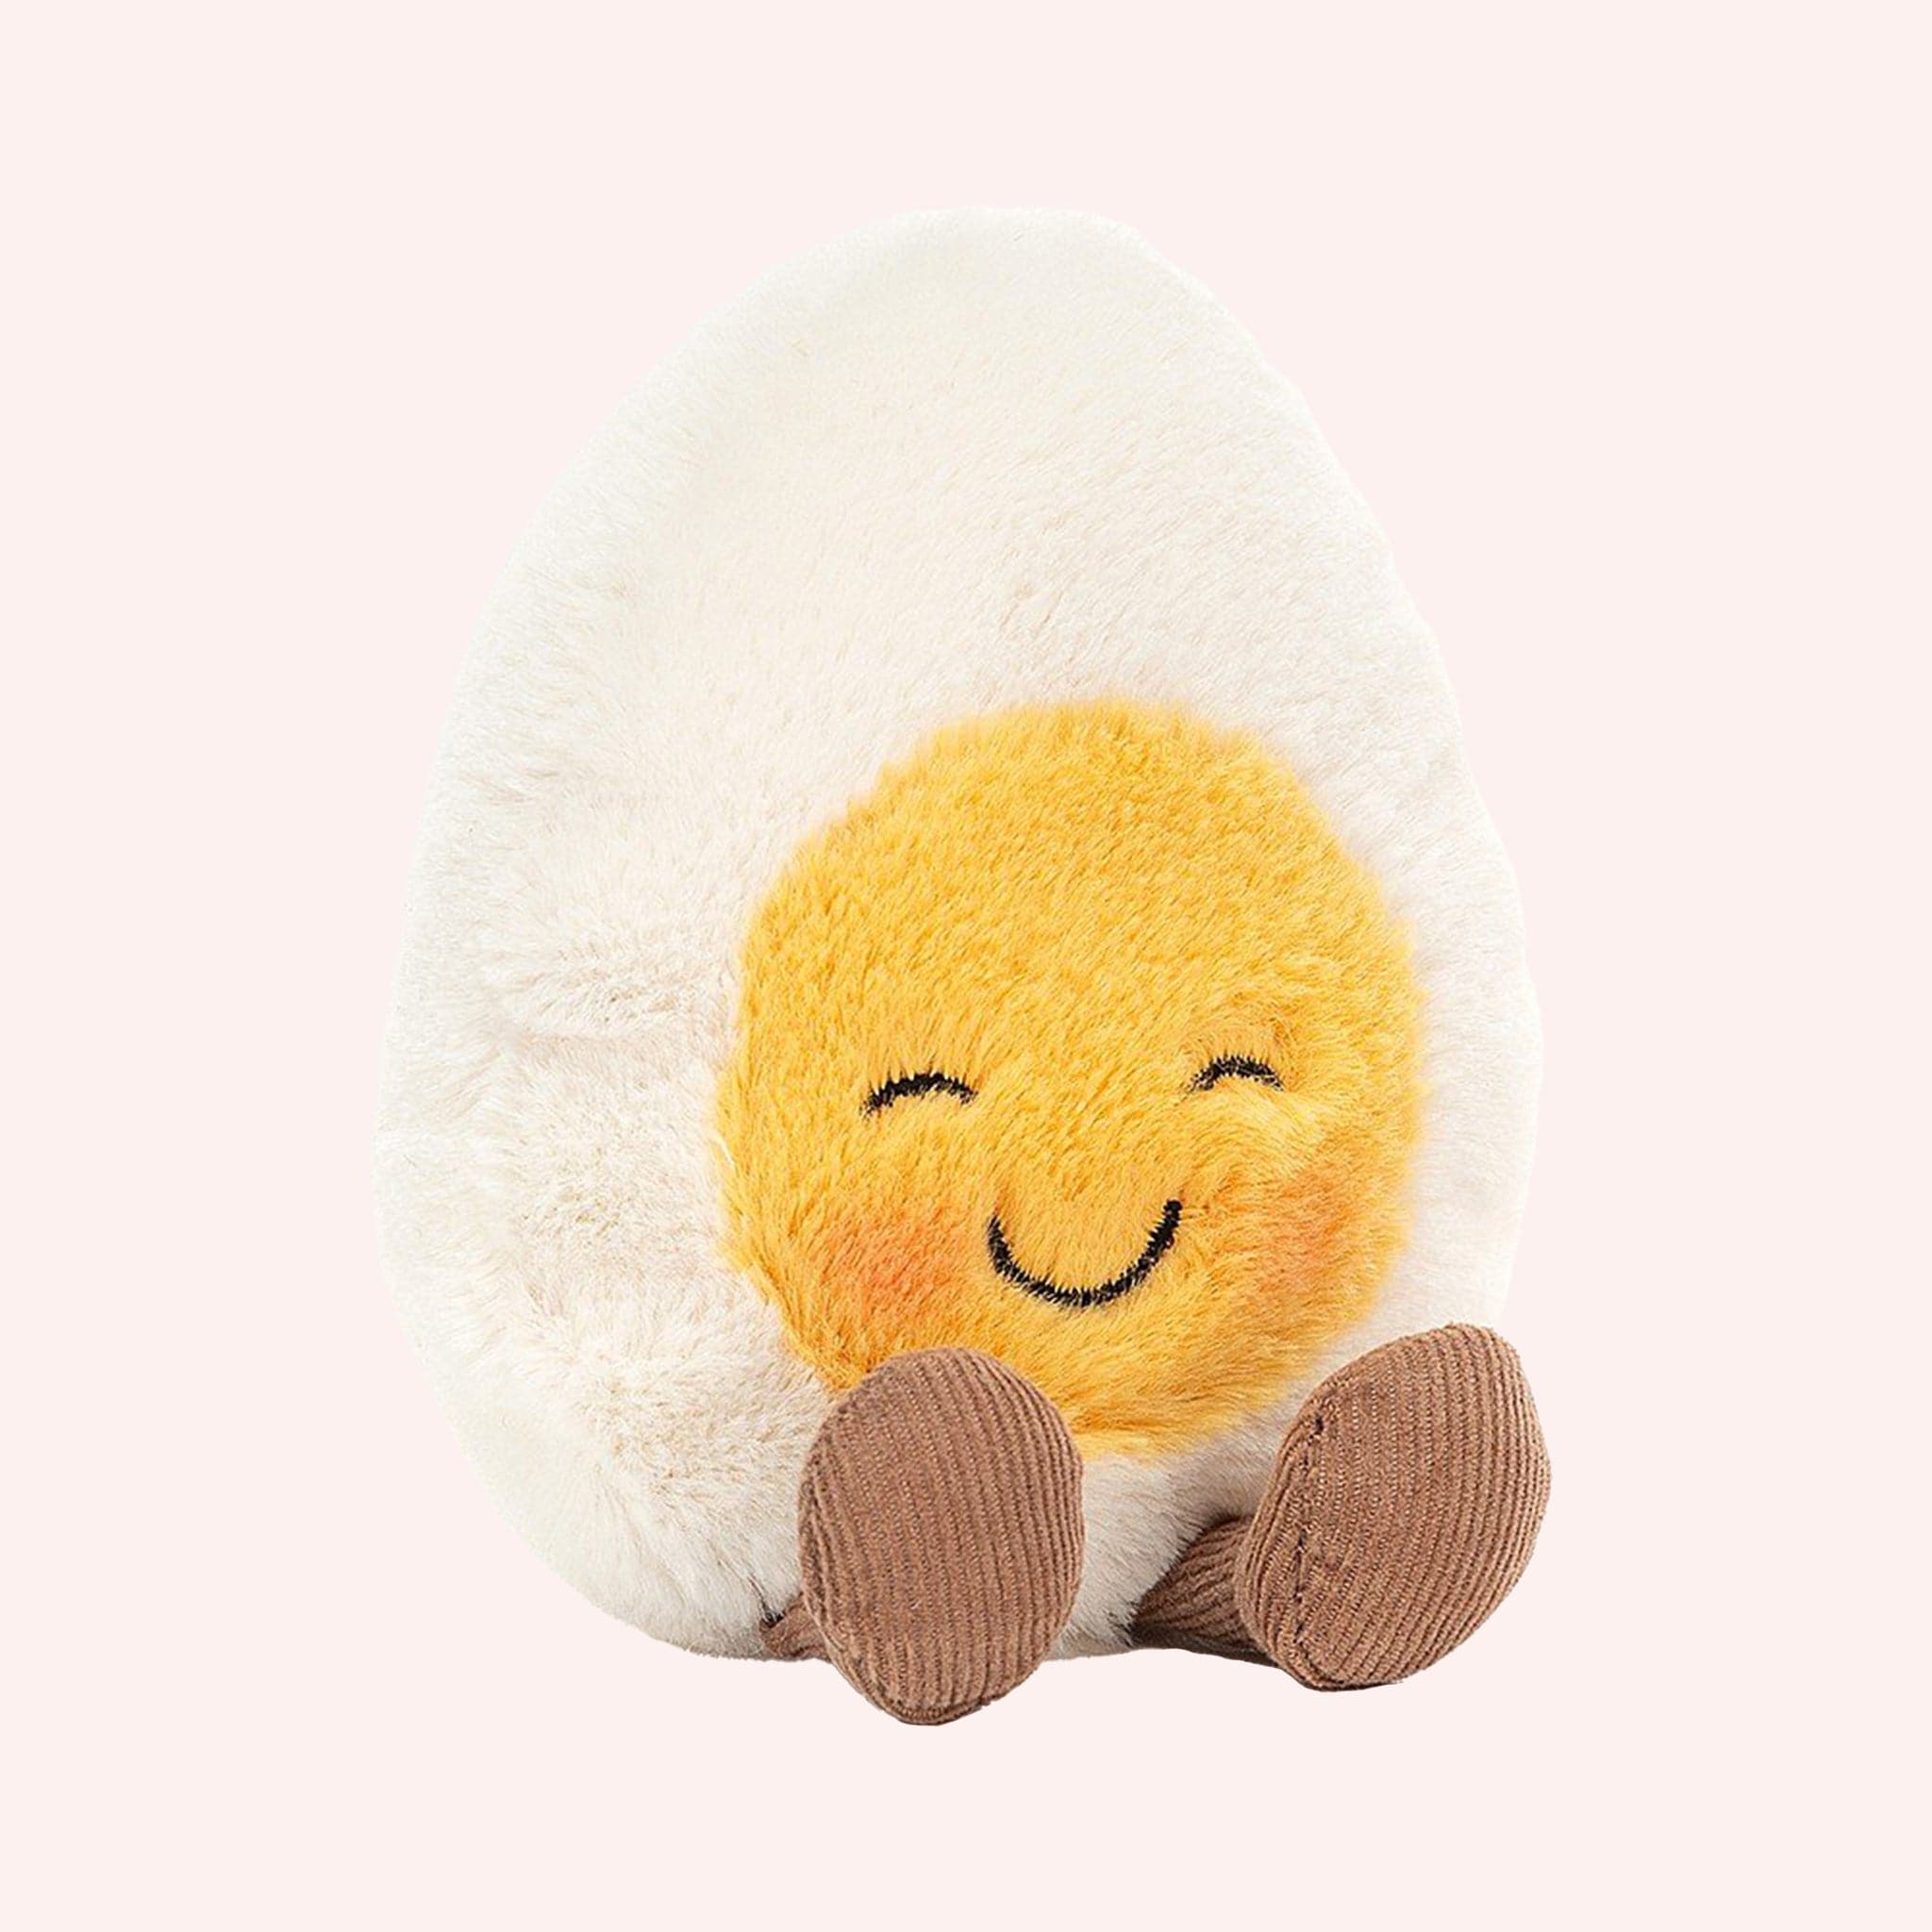 A soft stuffed animal in the shape of an egg with yellow yoke face and blushing smiley face, and brown floppy legs.